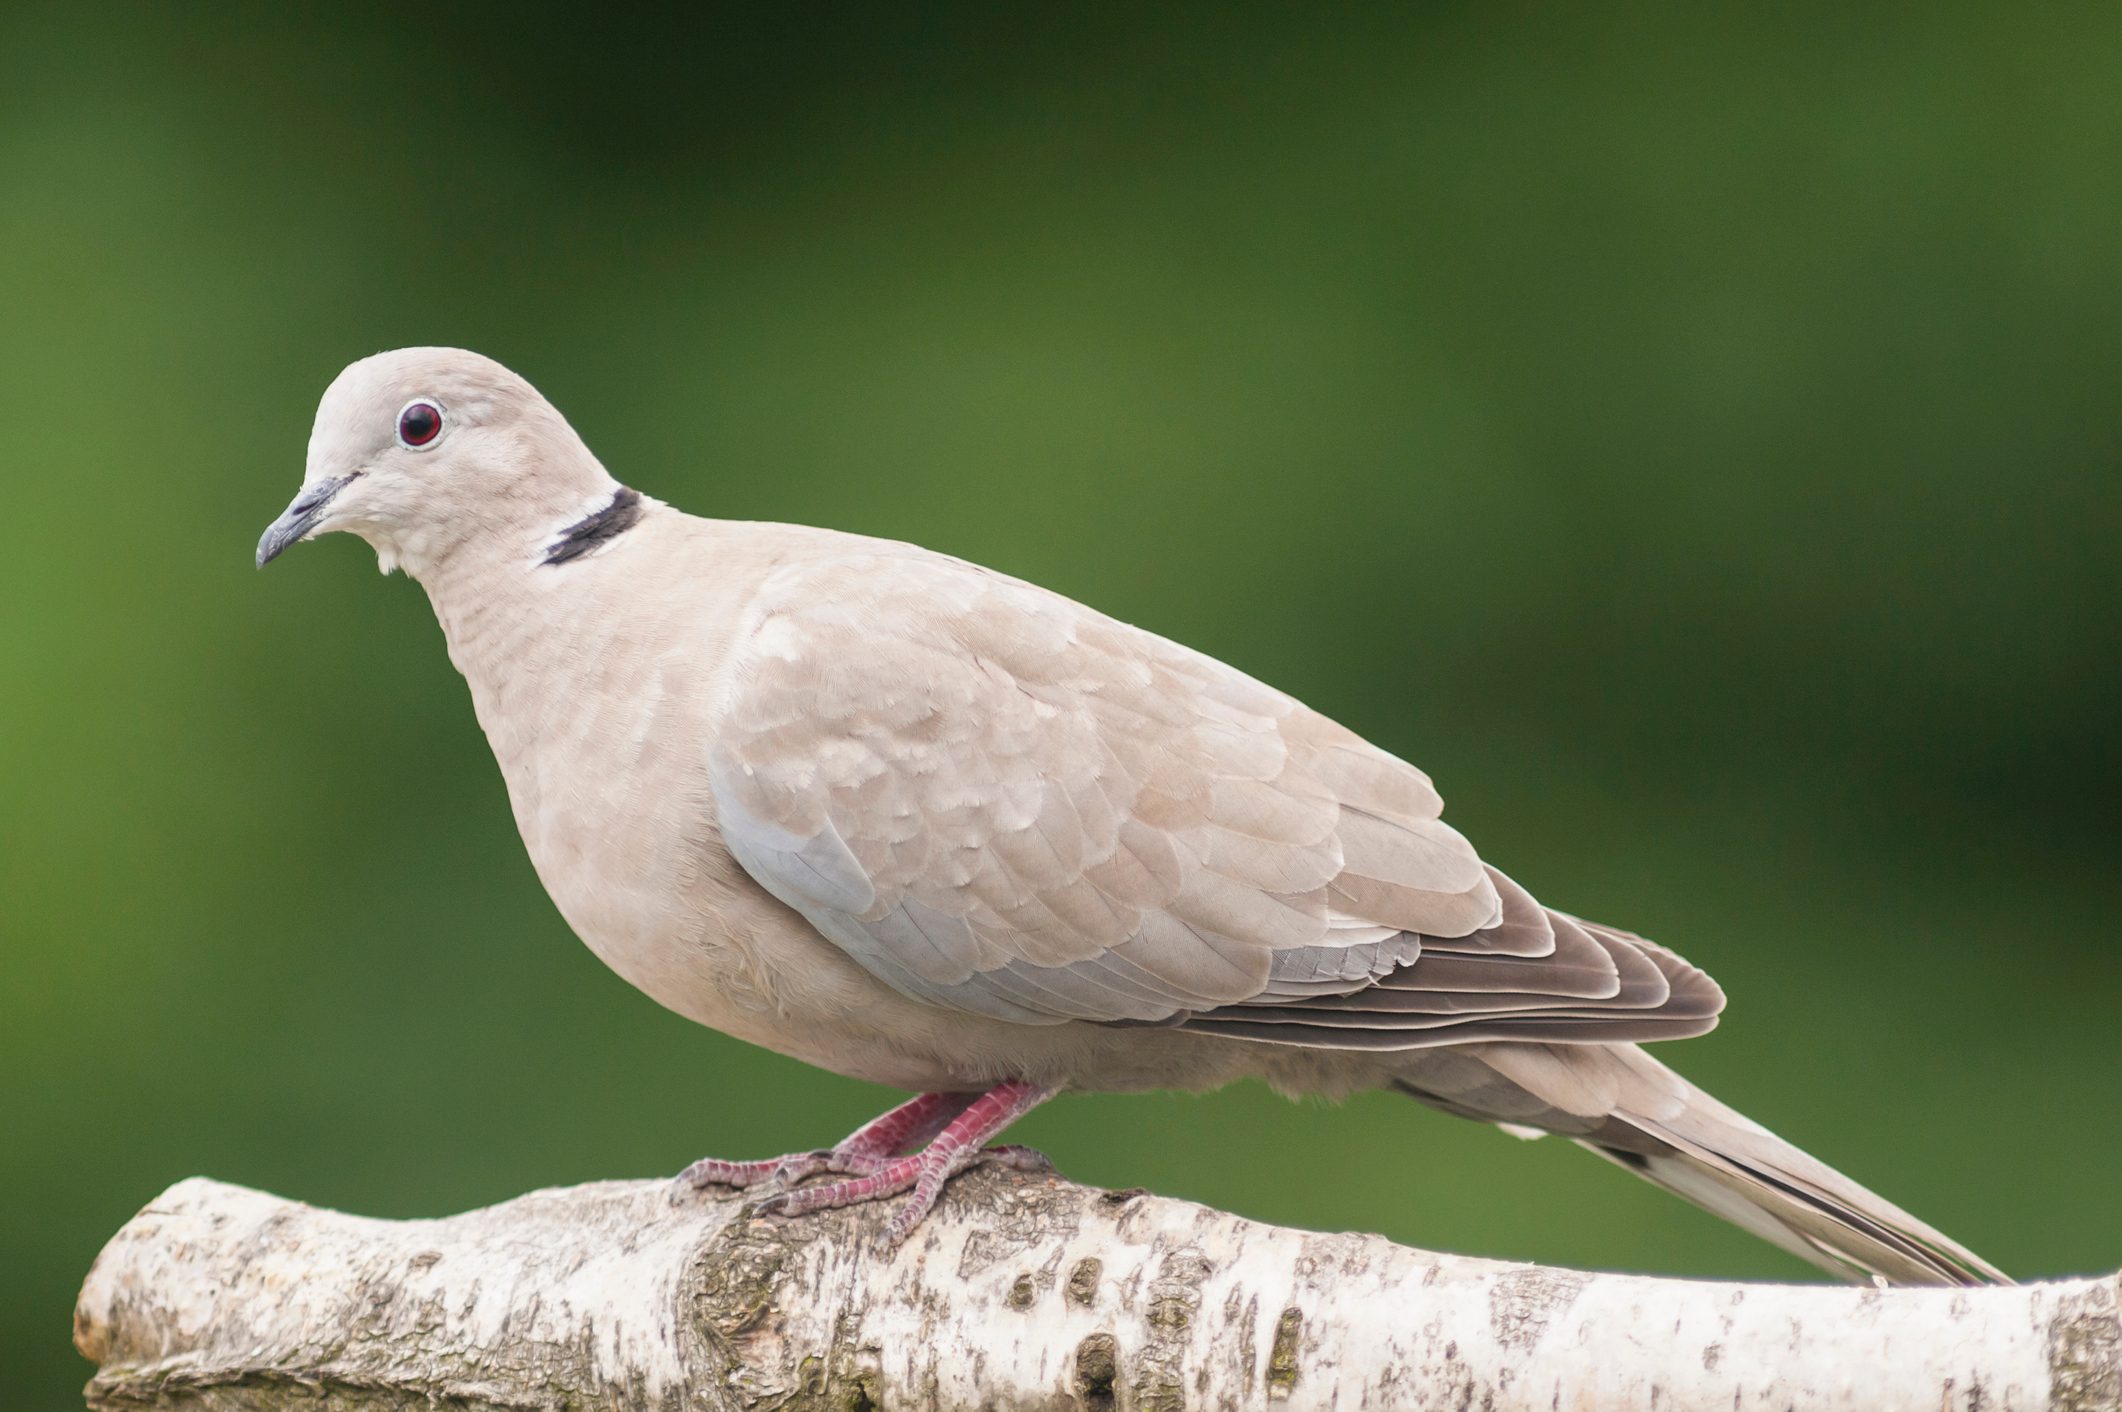 How much is a dove worth?